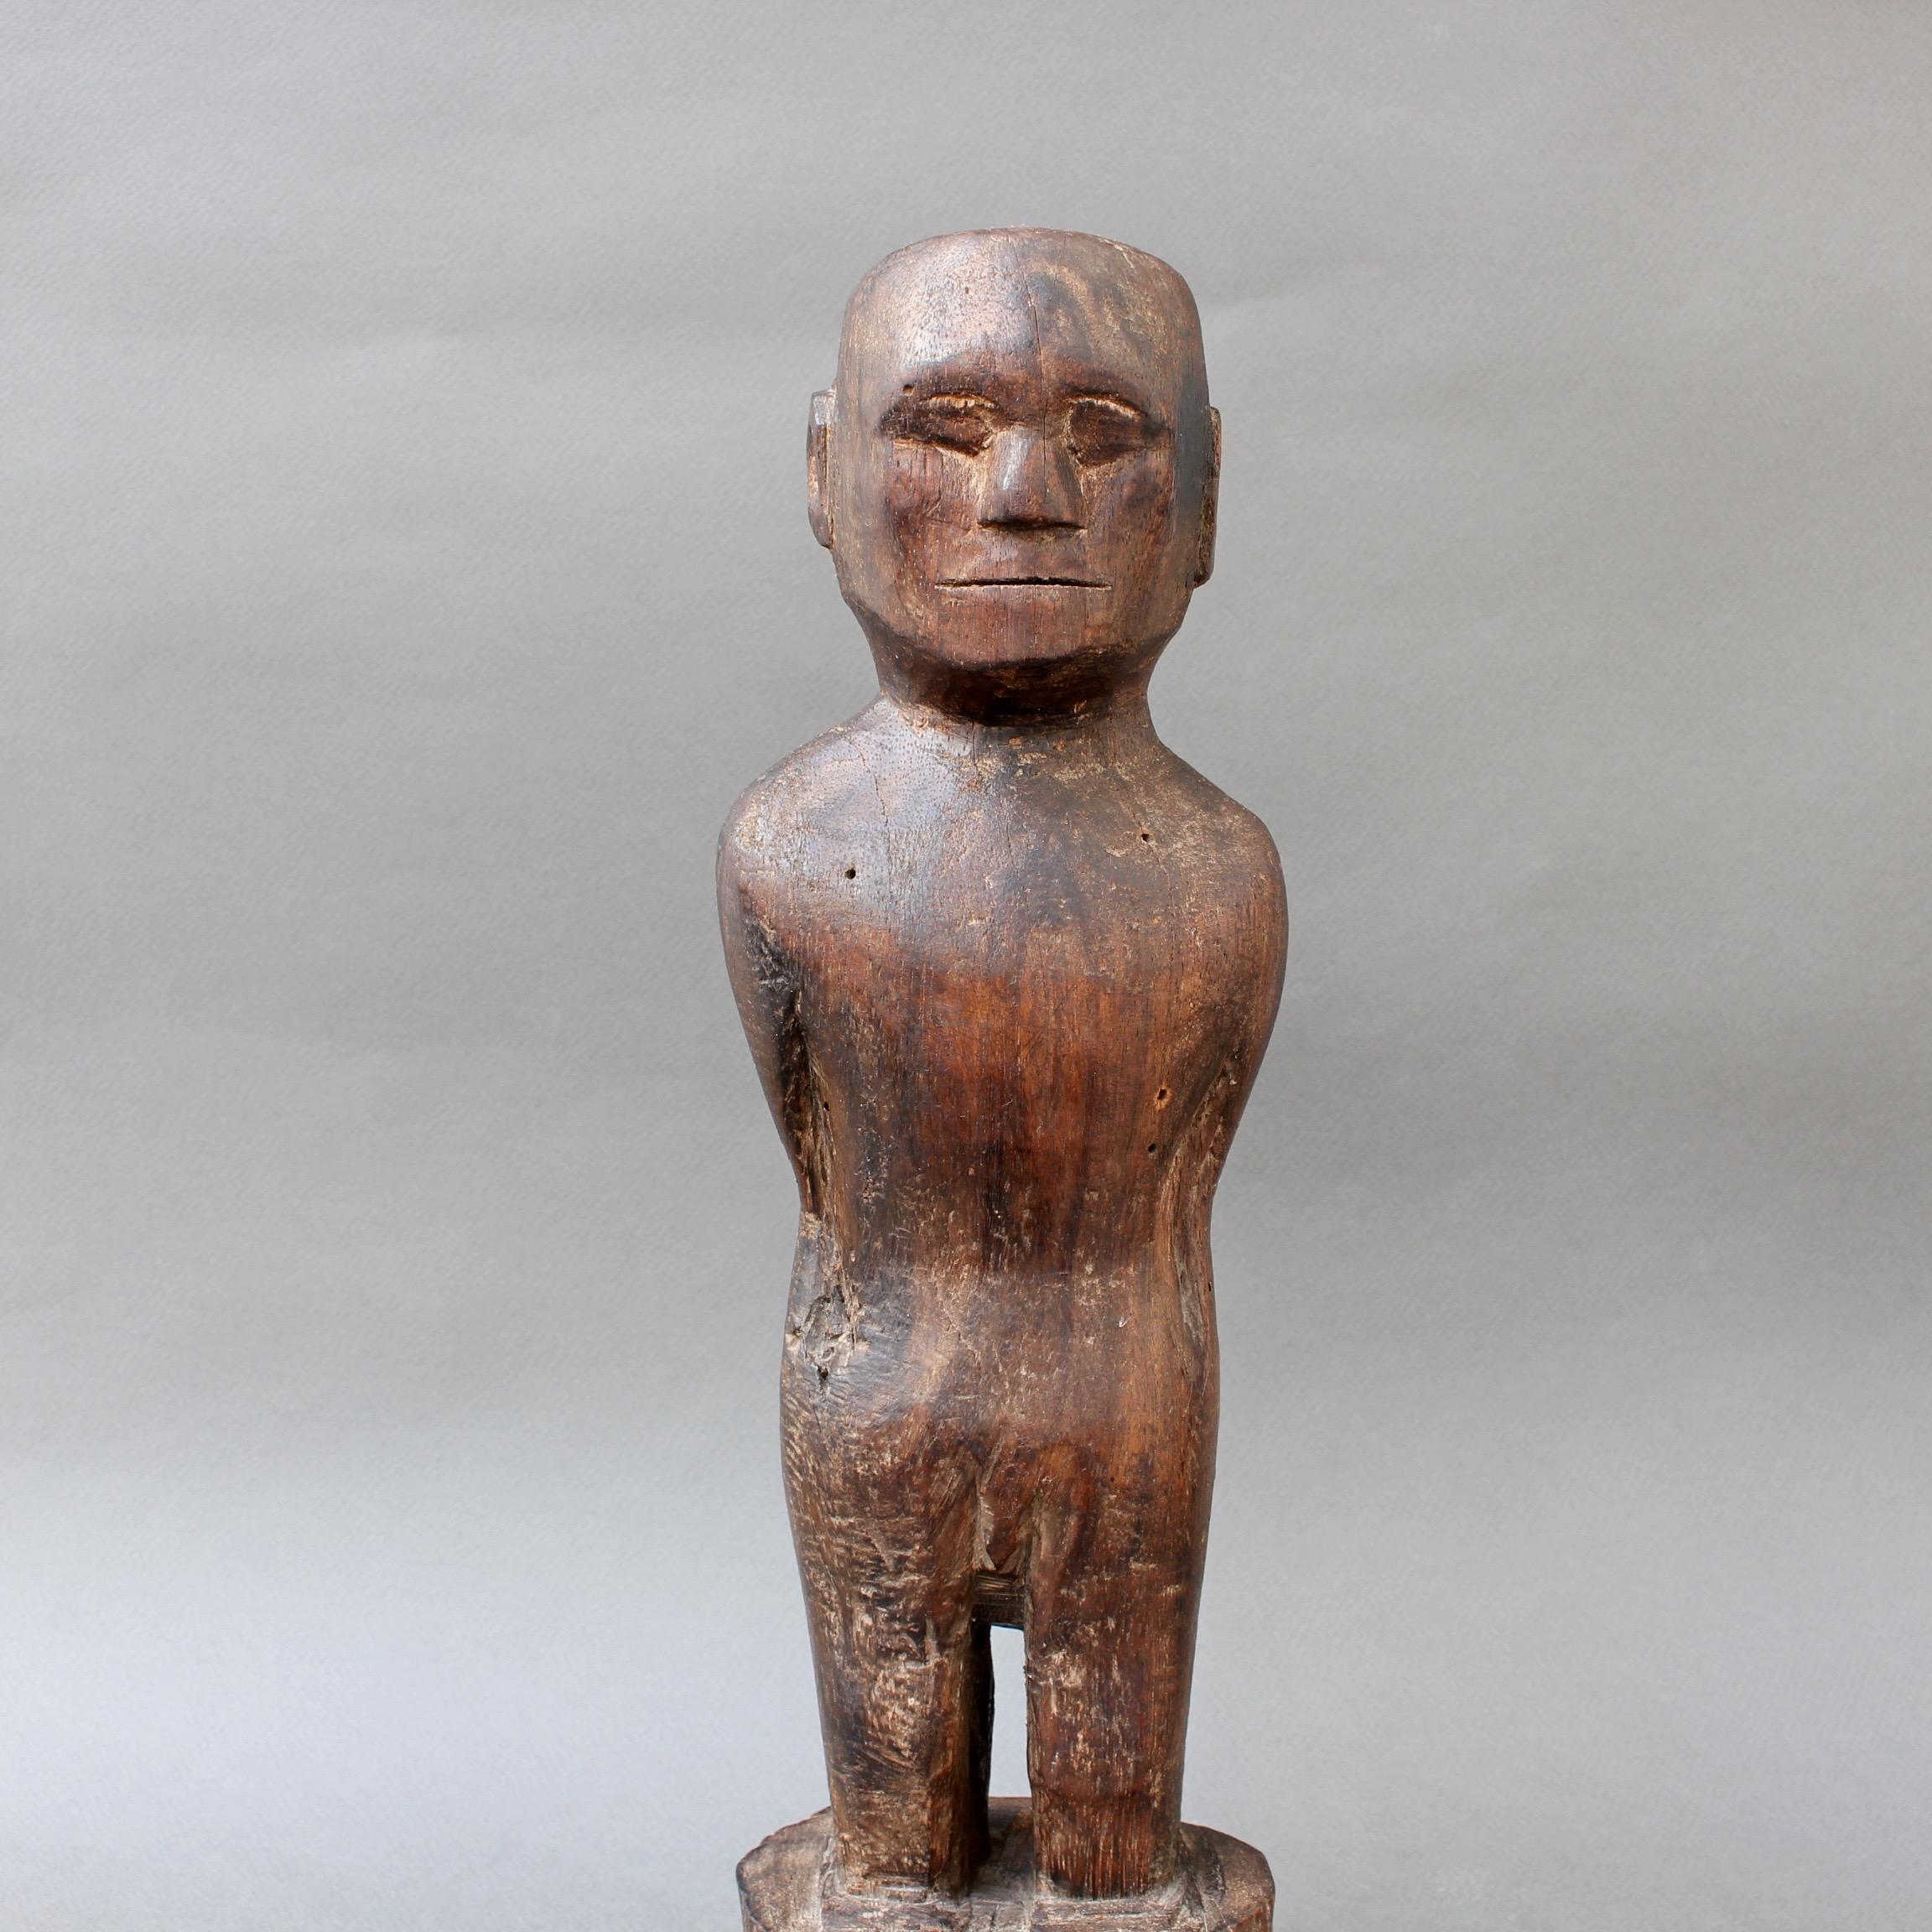 Wooden Carving or Sculpture of Standing Ancestral Figure from Timor, Indonesia 1